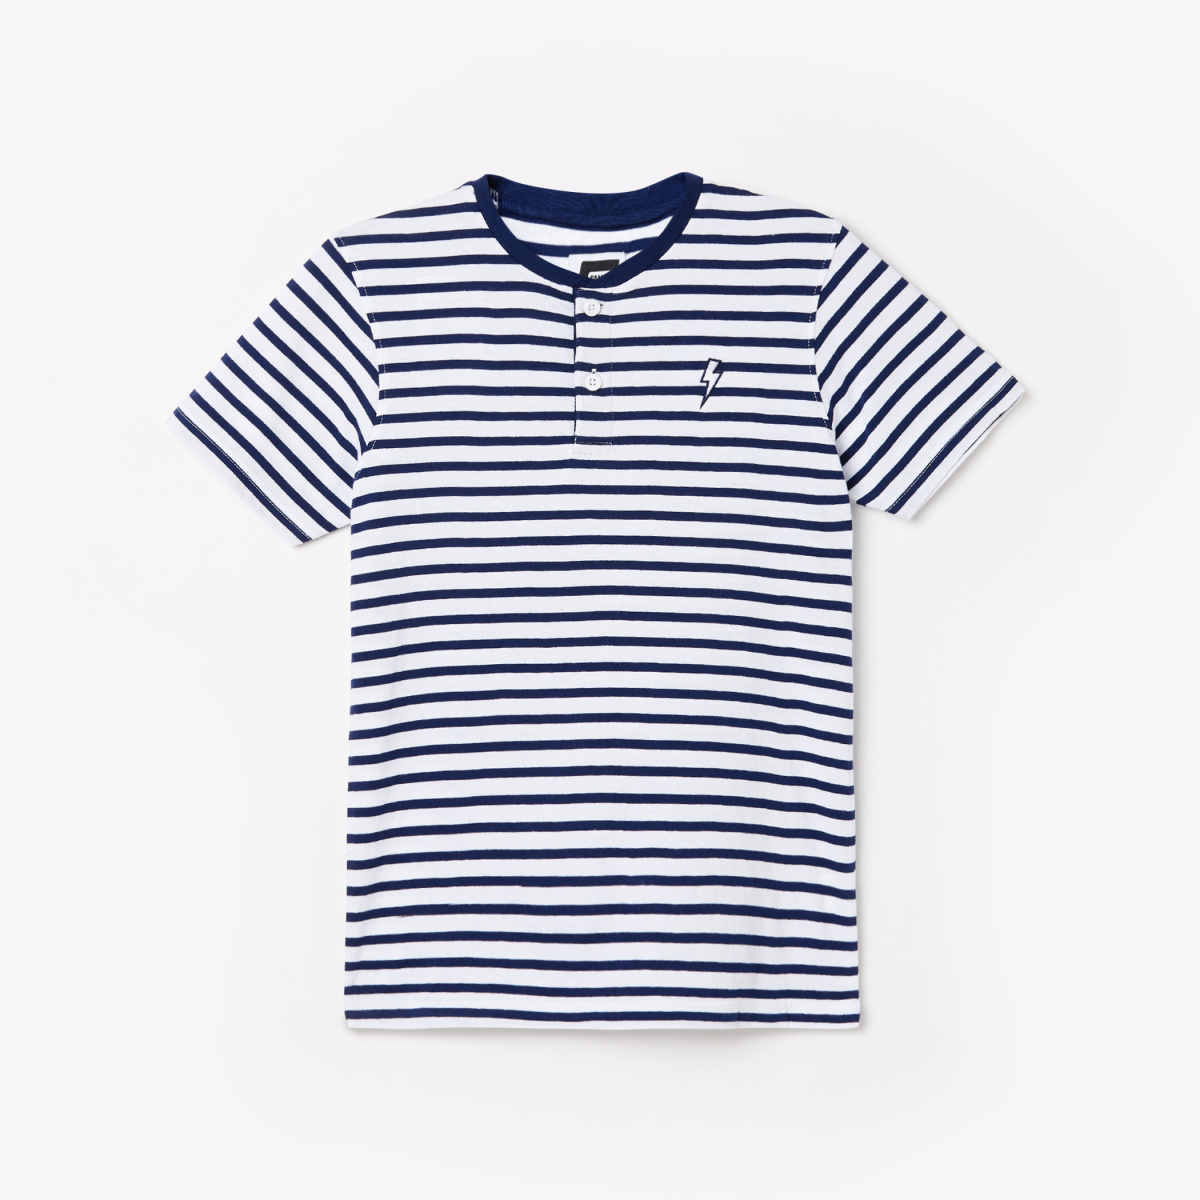 FAME FOREVER YOUNG Boys Striped Henley T-shirt